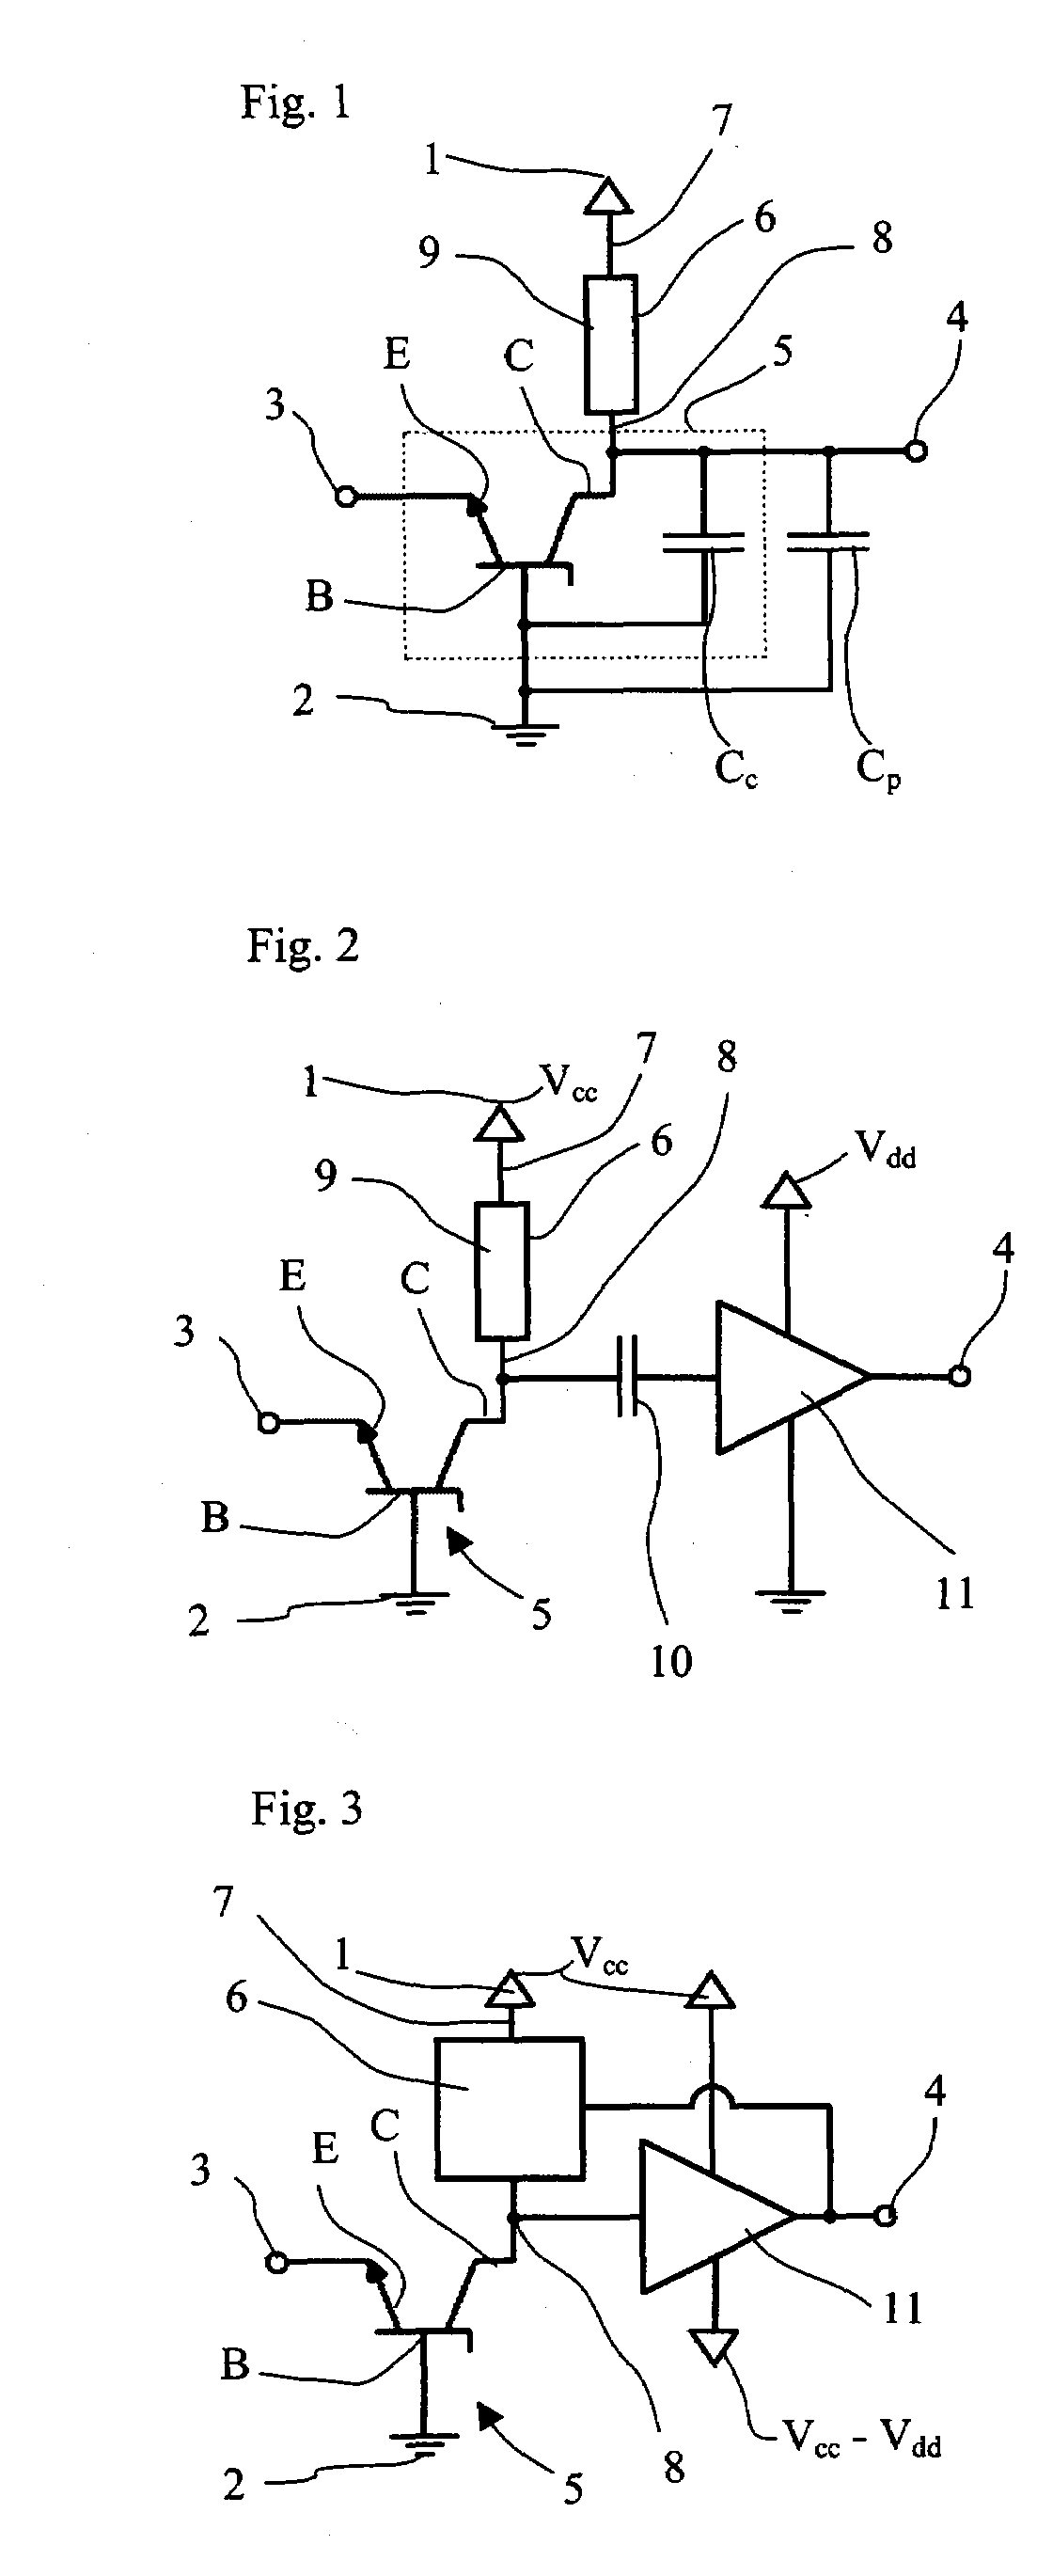 Semiconductor Device For Measuring Ultra Small Electrical Currents And Small Voltages